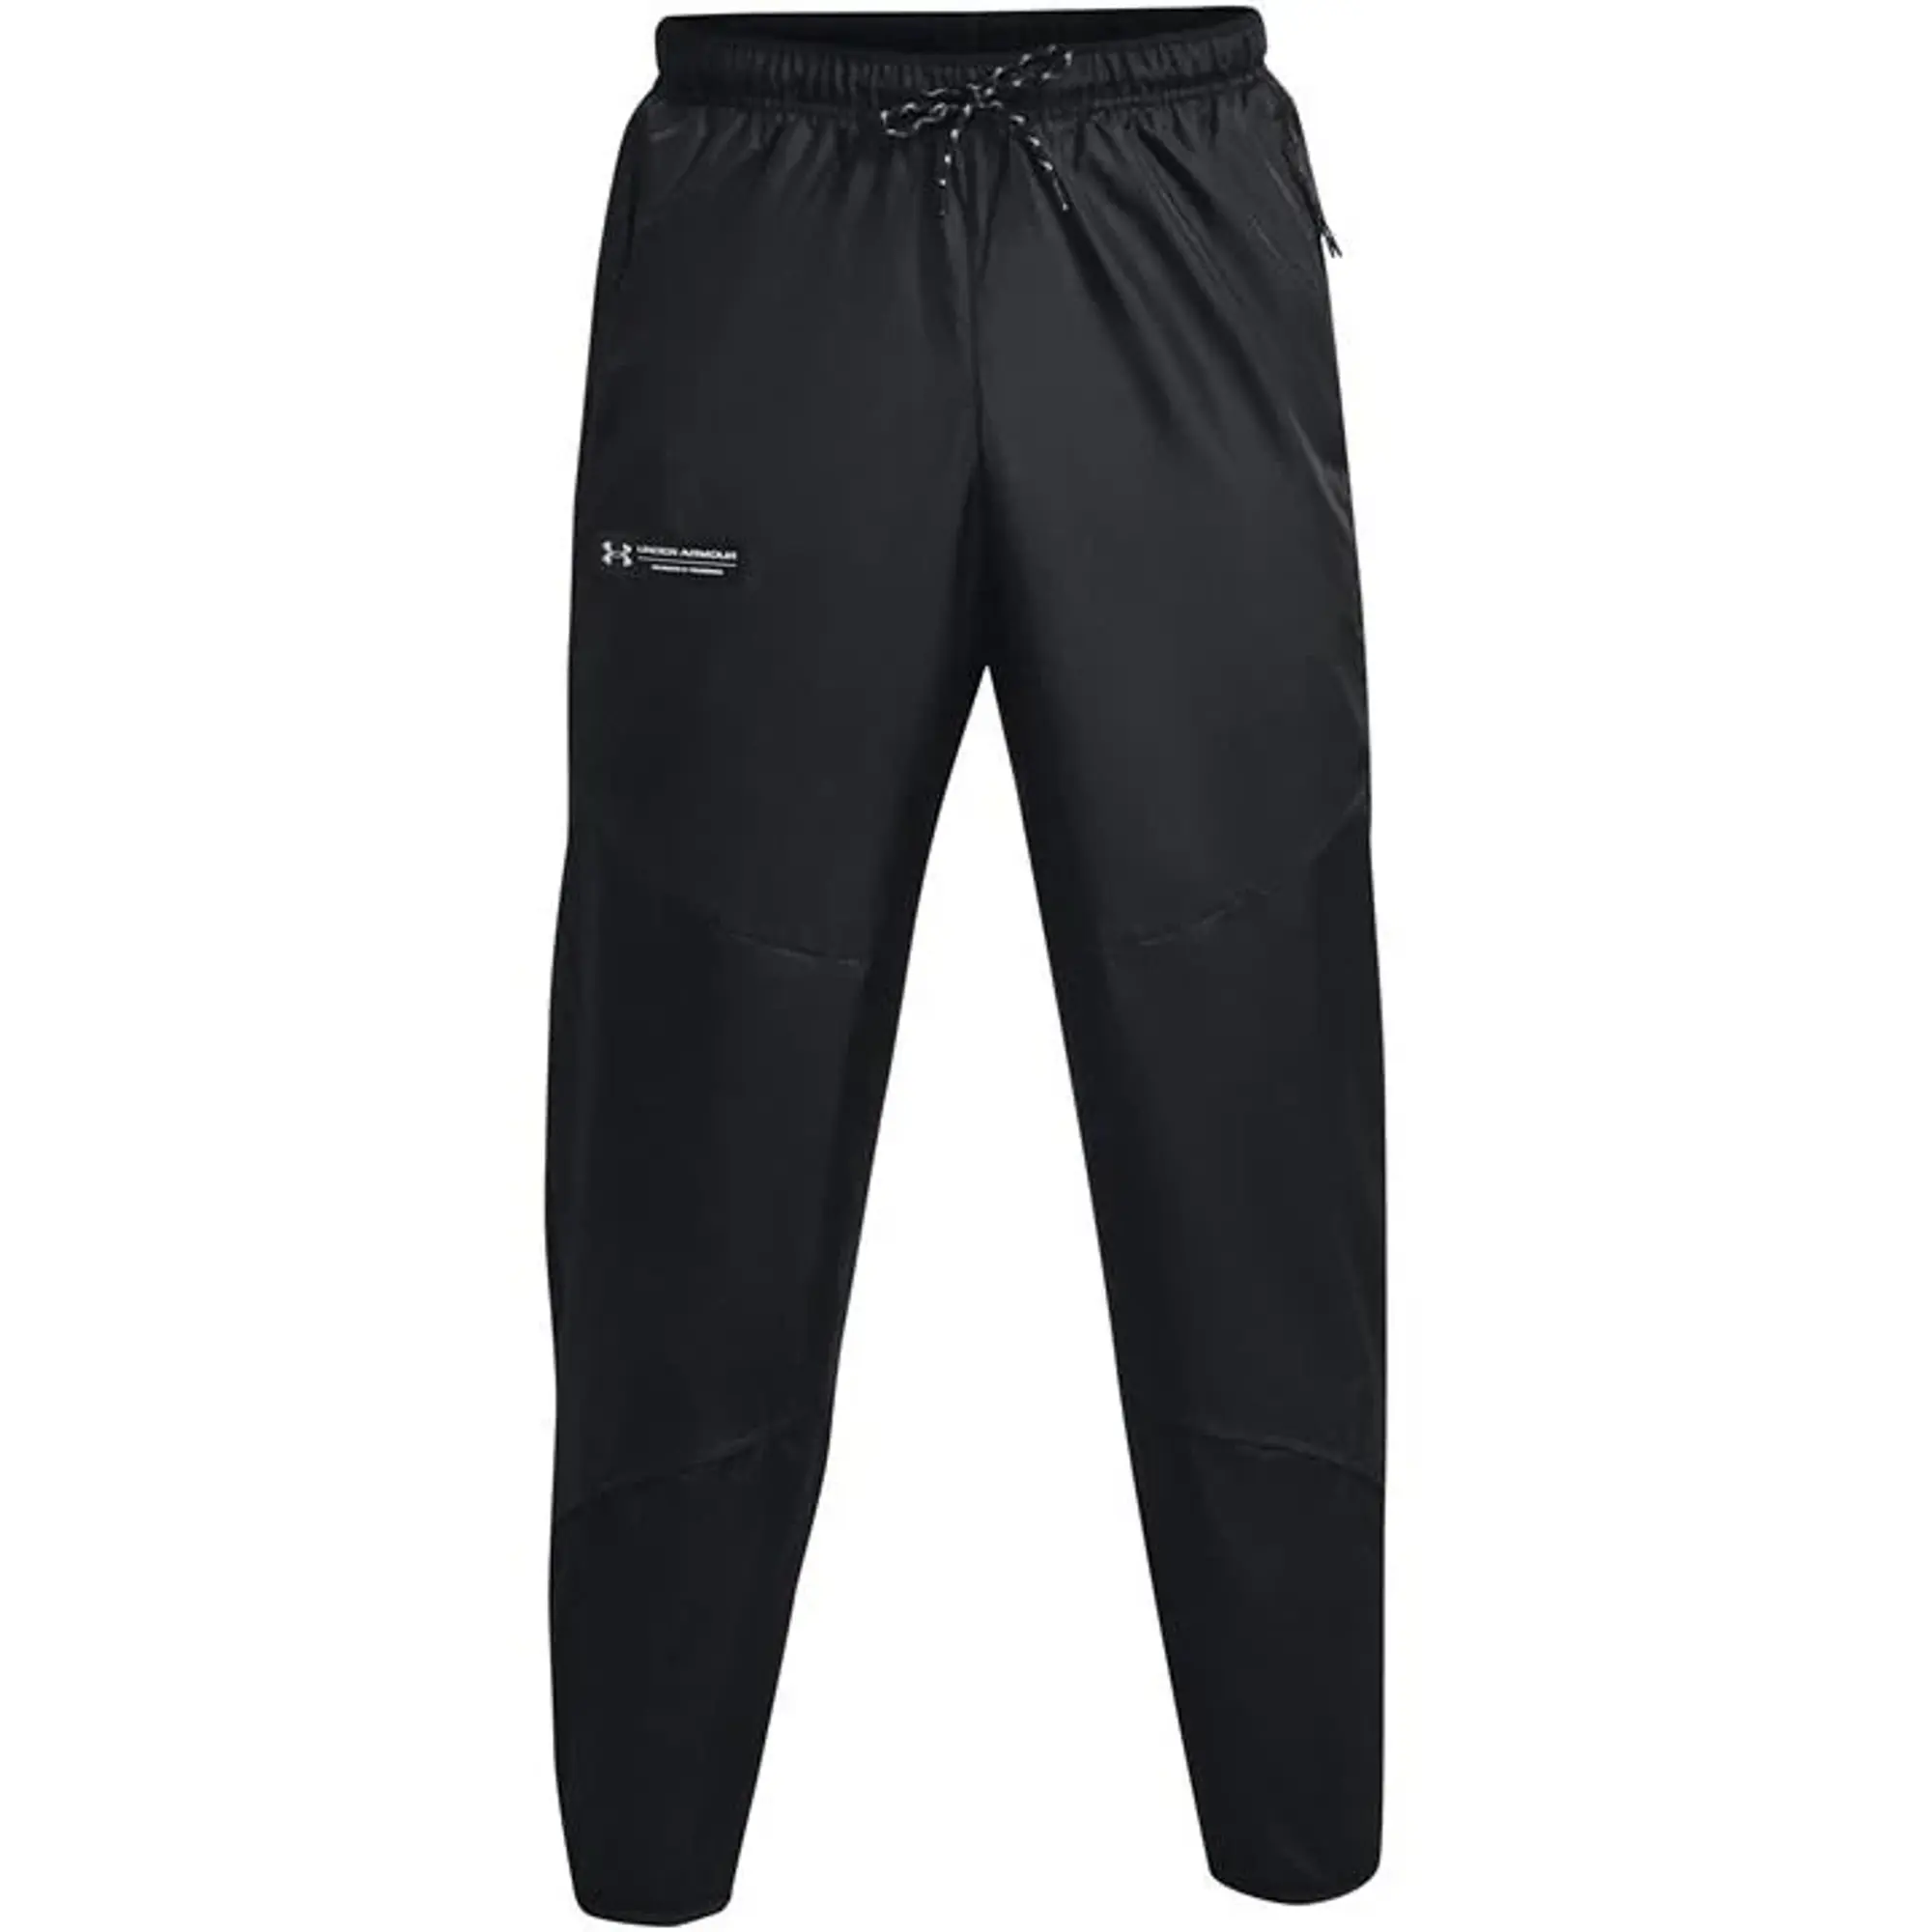 Under Armour Rush Woven Pant Sn99 - Black